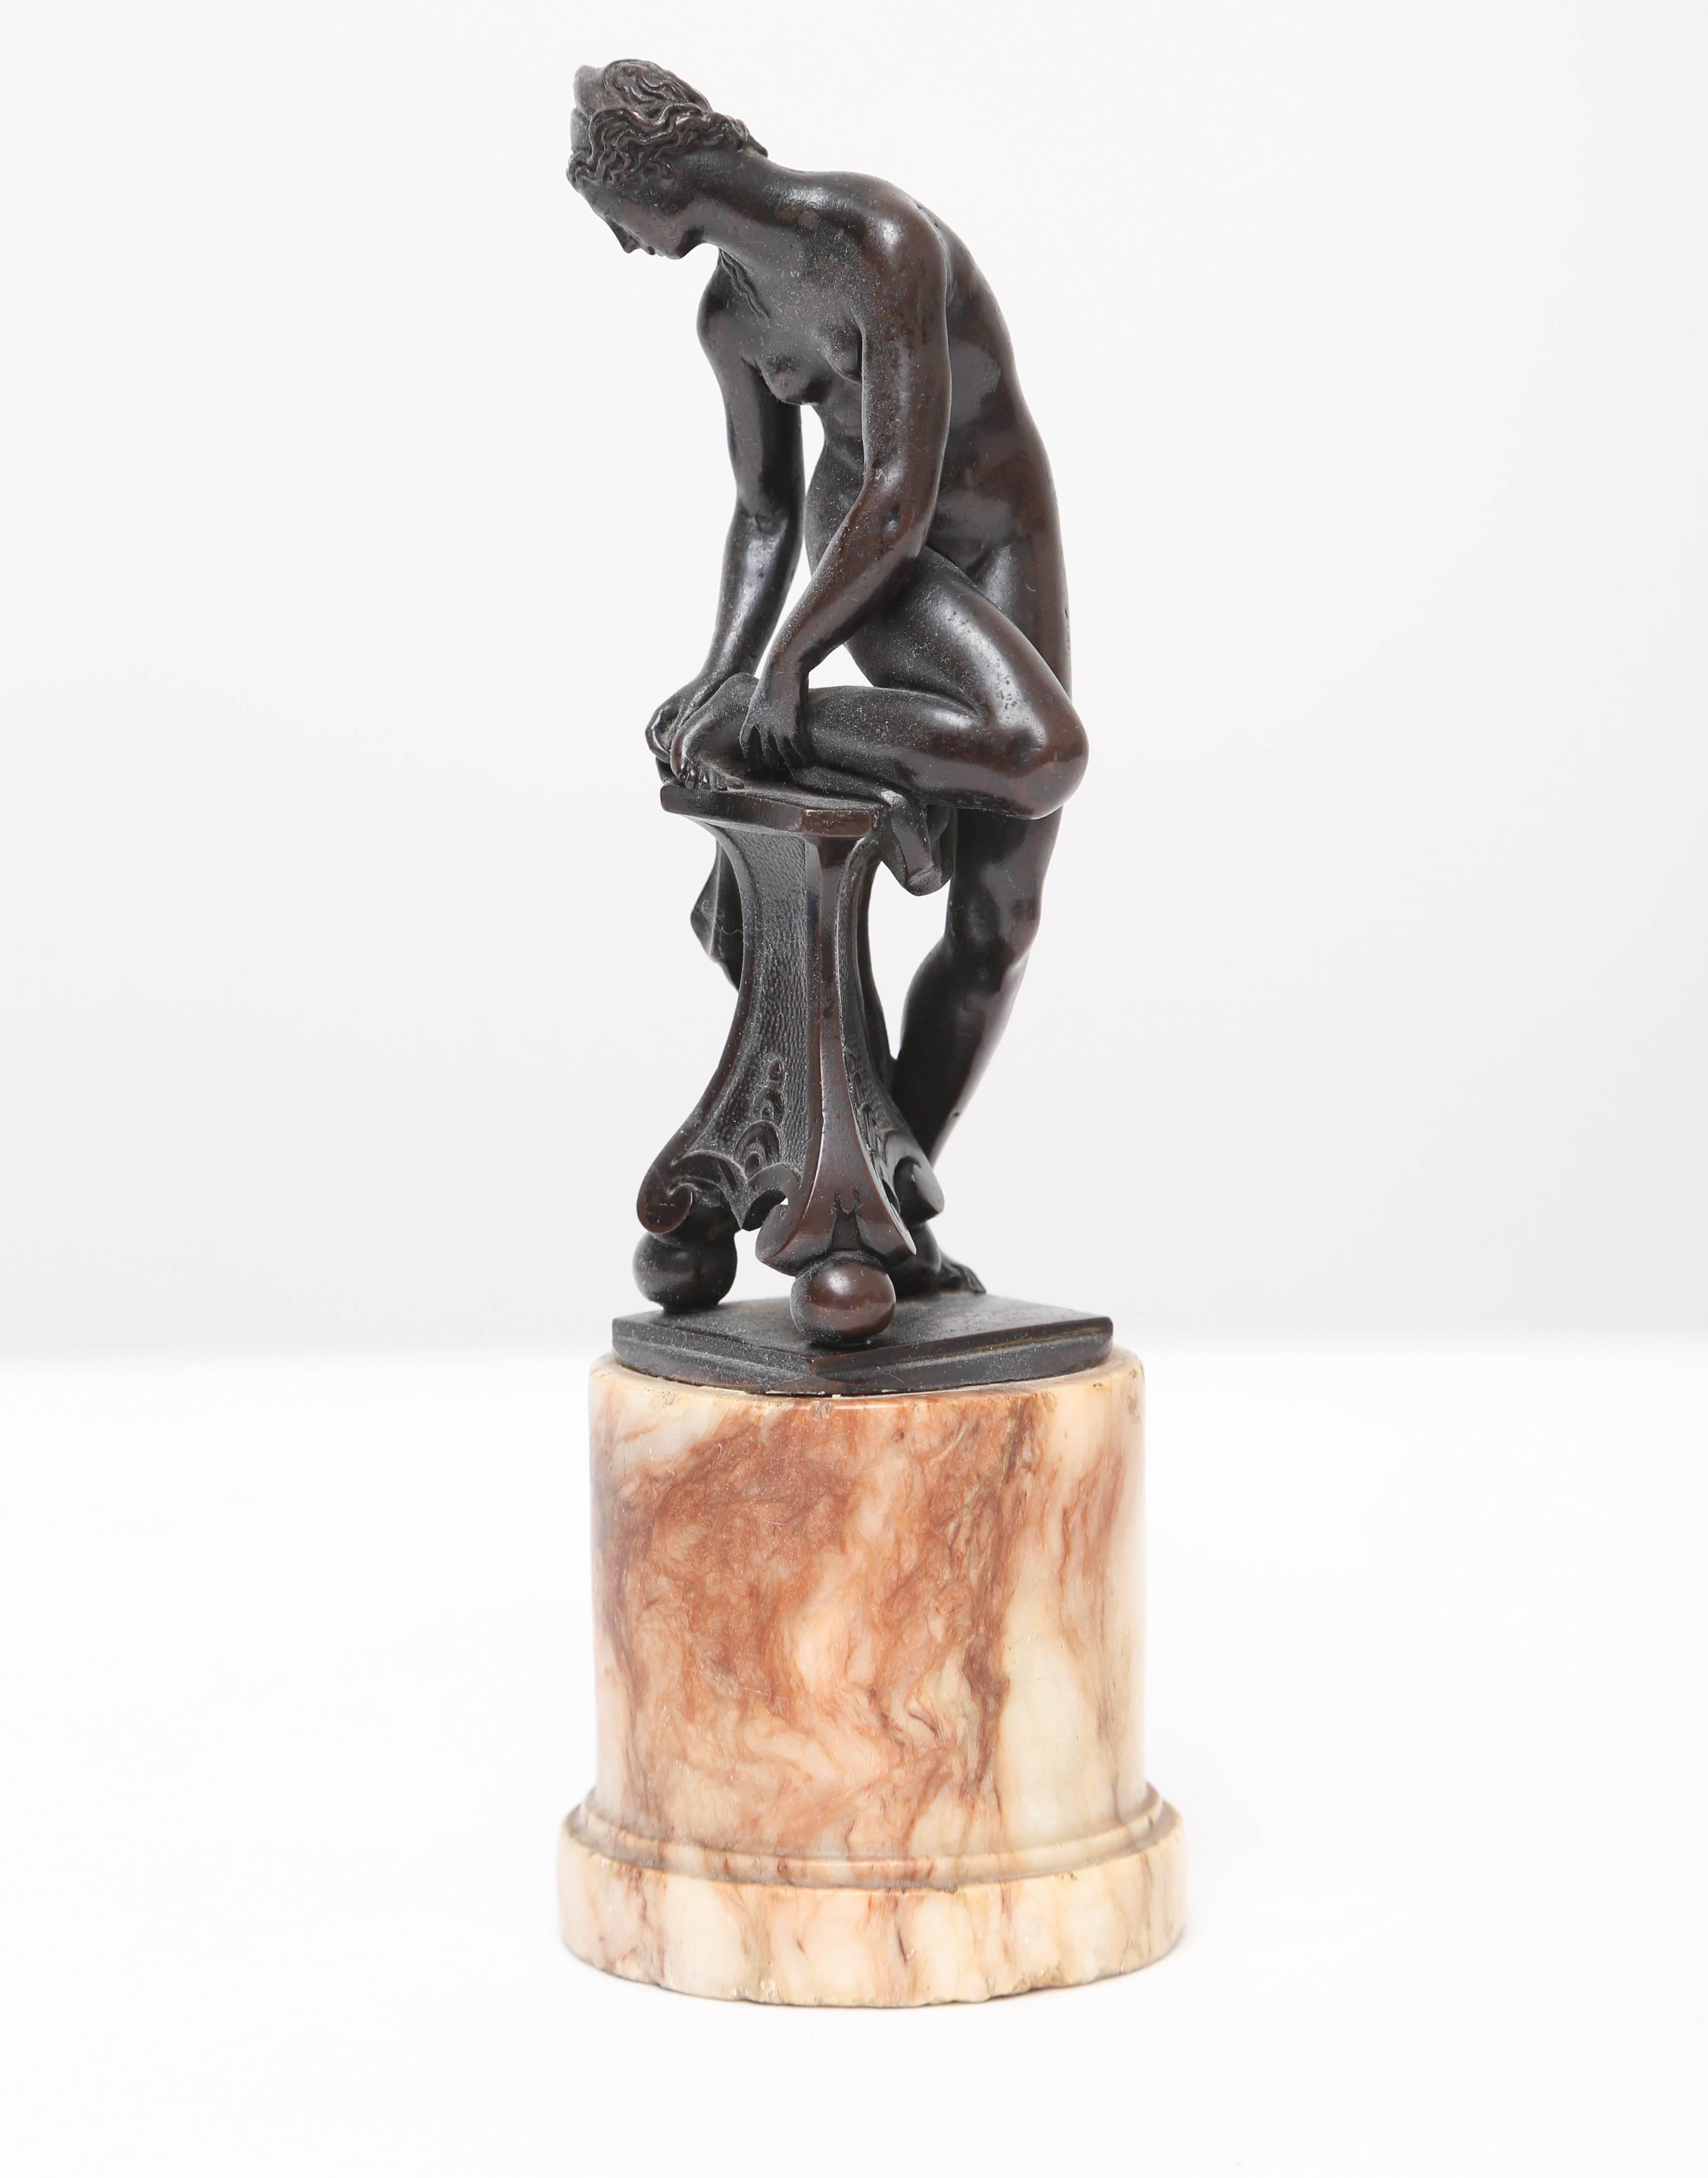 Although this bronze was cast after Giambologna (1527-1608), this model of Venus removing a throne from her foot as it rests on a tripod pedestal is very rare with few known examples. In their 1978 Giambologna exhibition catalogue Charles Avery and